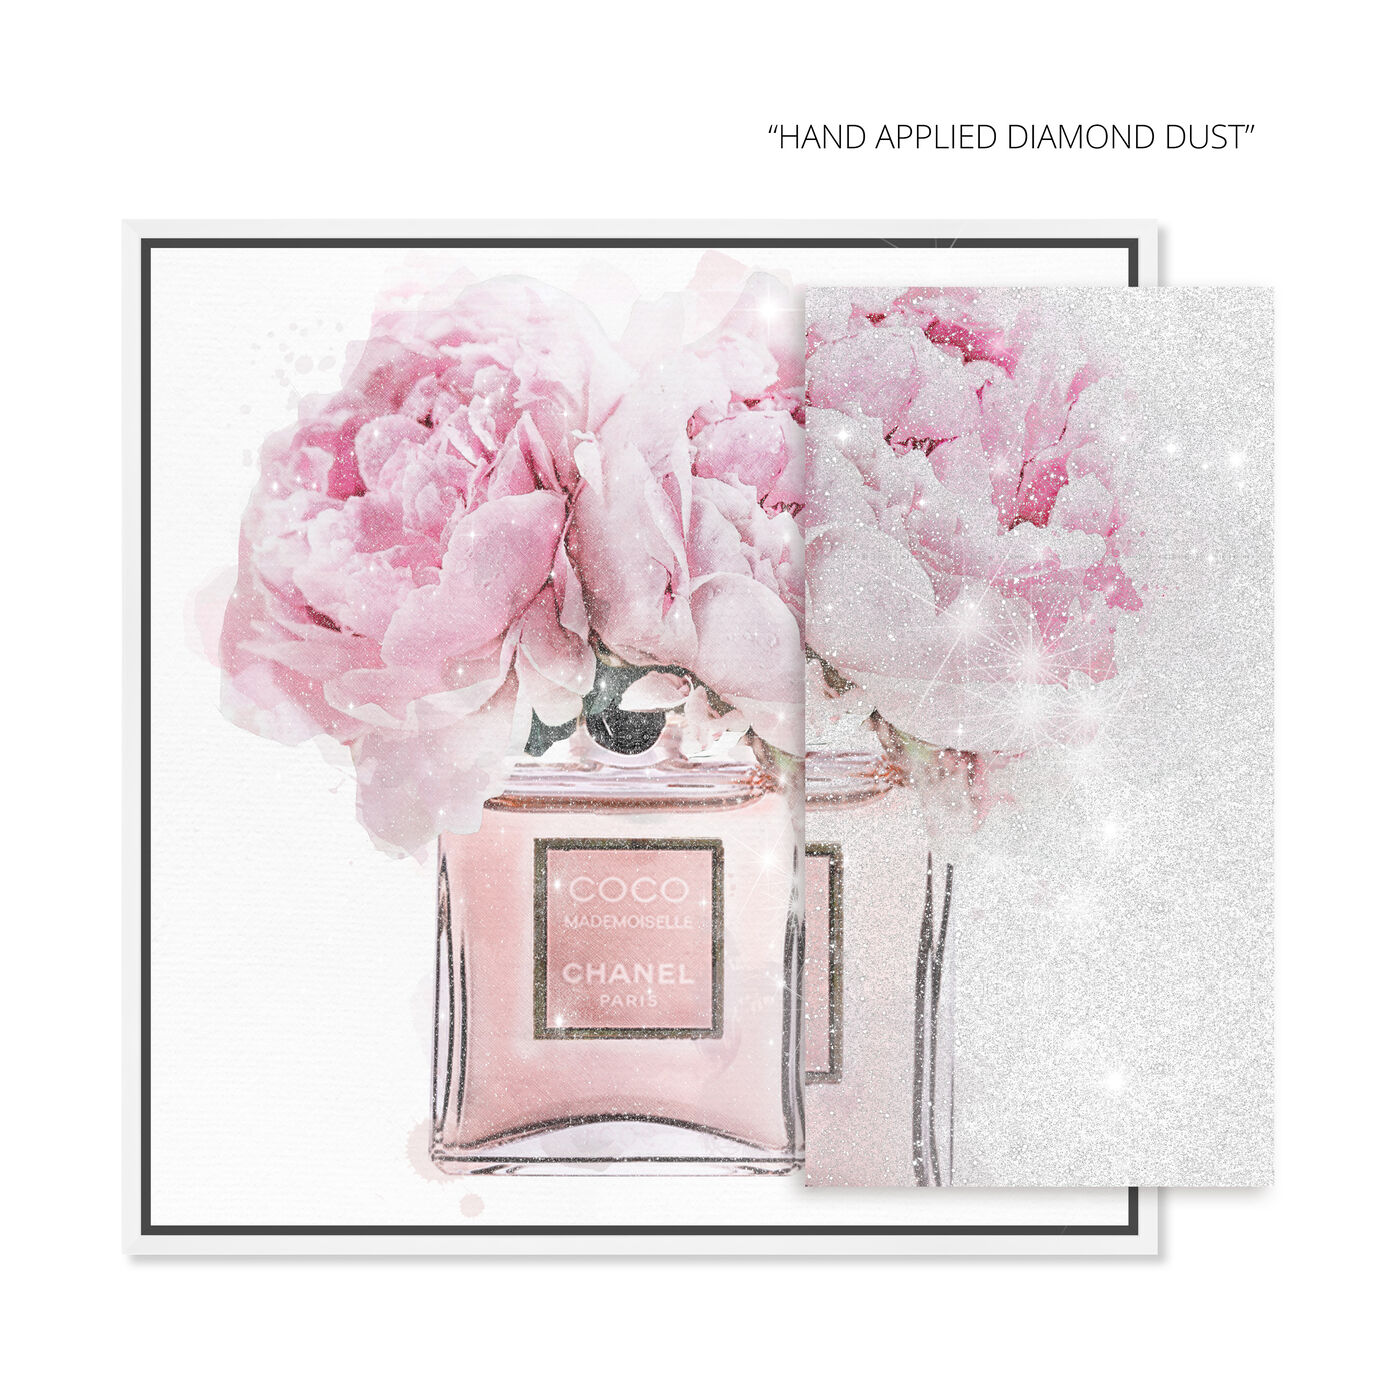 Oliver Gal 'Blooming Bouquet' Fashion and Glam Wall Art Framed Canvas Print  Perfumes - White, Pink - Bed Bath & Beyond - 31794660